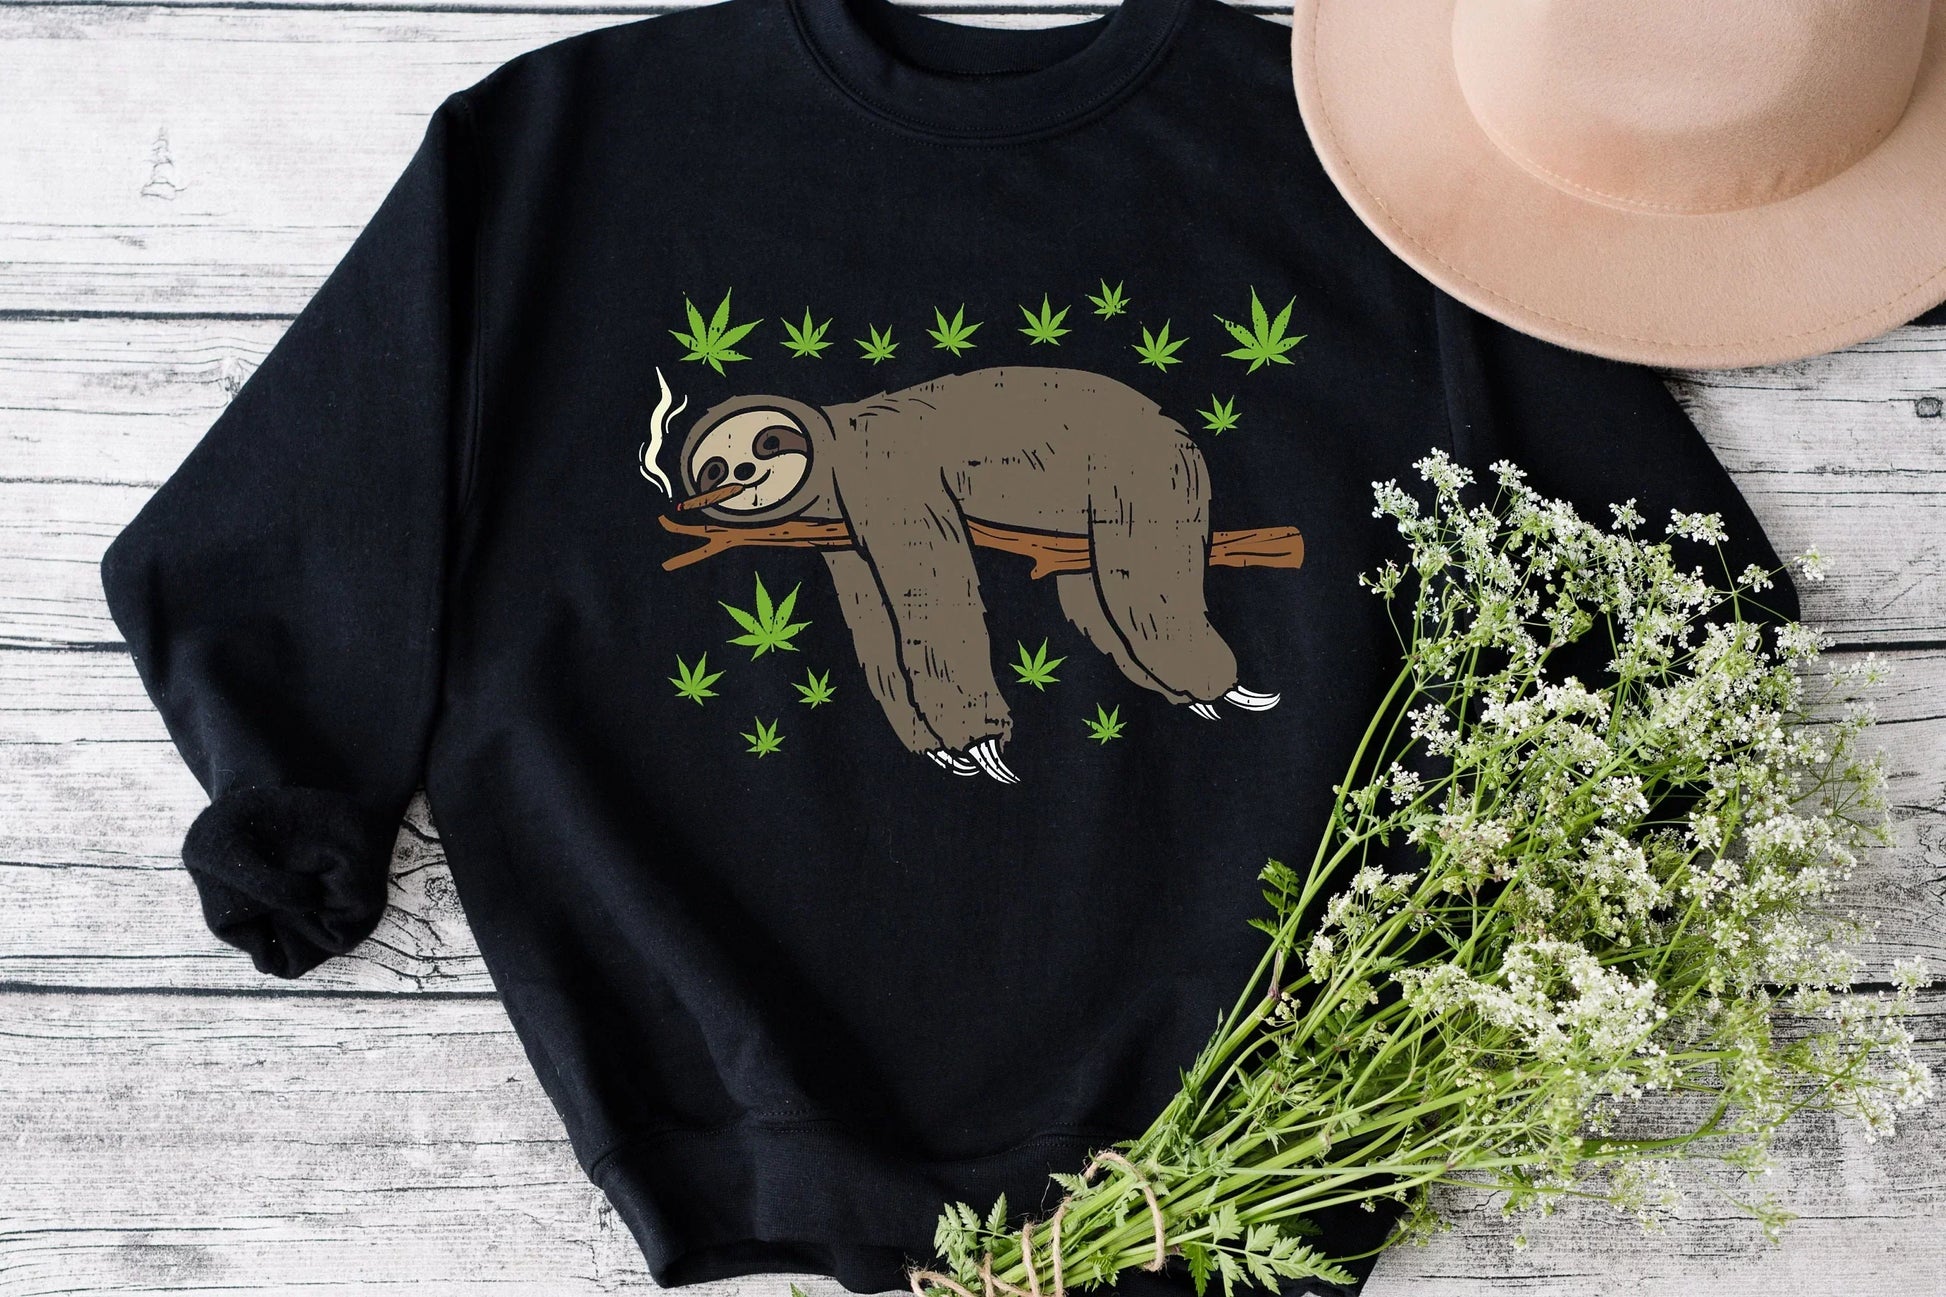 Stoner Gifts, Hippie Clothes, Weed Gifts, Weed Shirt, Sloth Gift, Stoner Girl, Stoner Gift for Him, Stoner Gift for Her, Marijuana T shirts HMDesignStudioUS